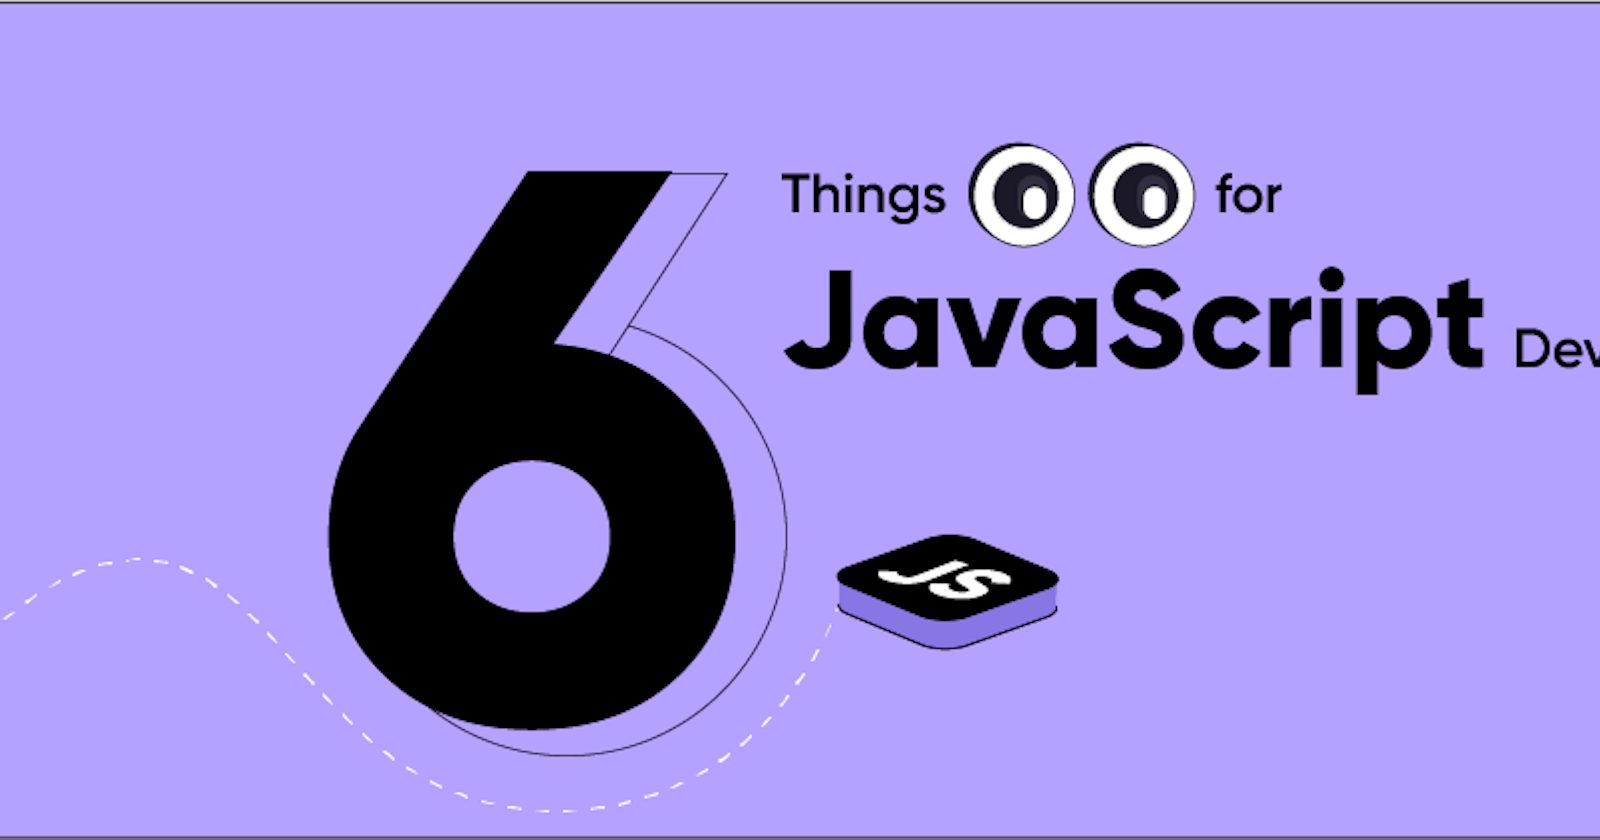 Hiring JavaScript Developers: 6 Things to Look For